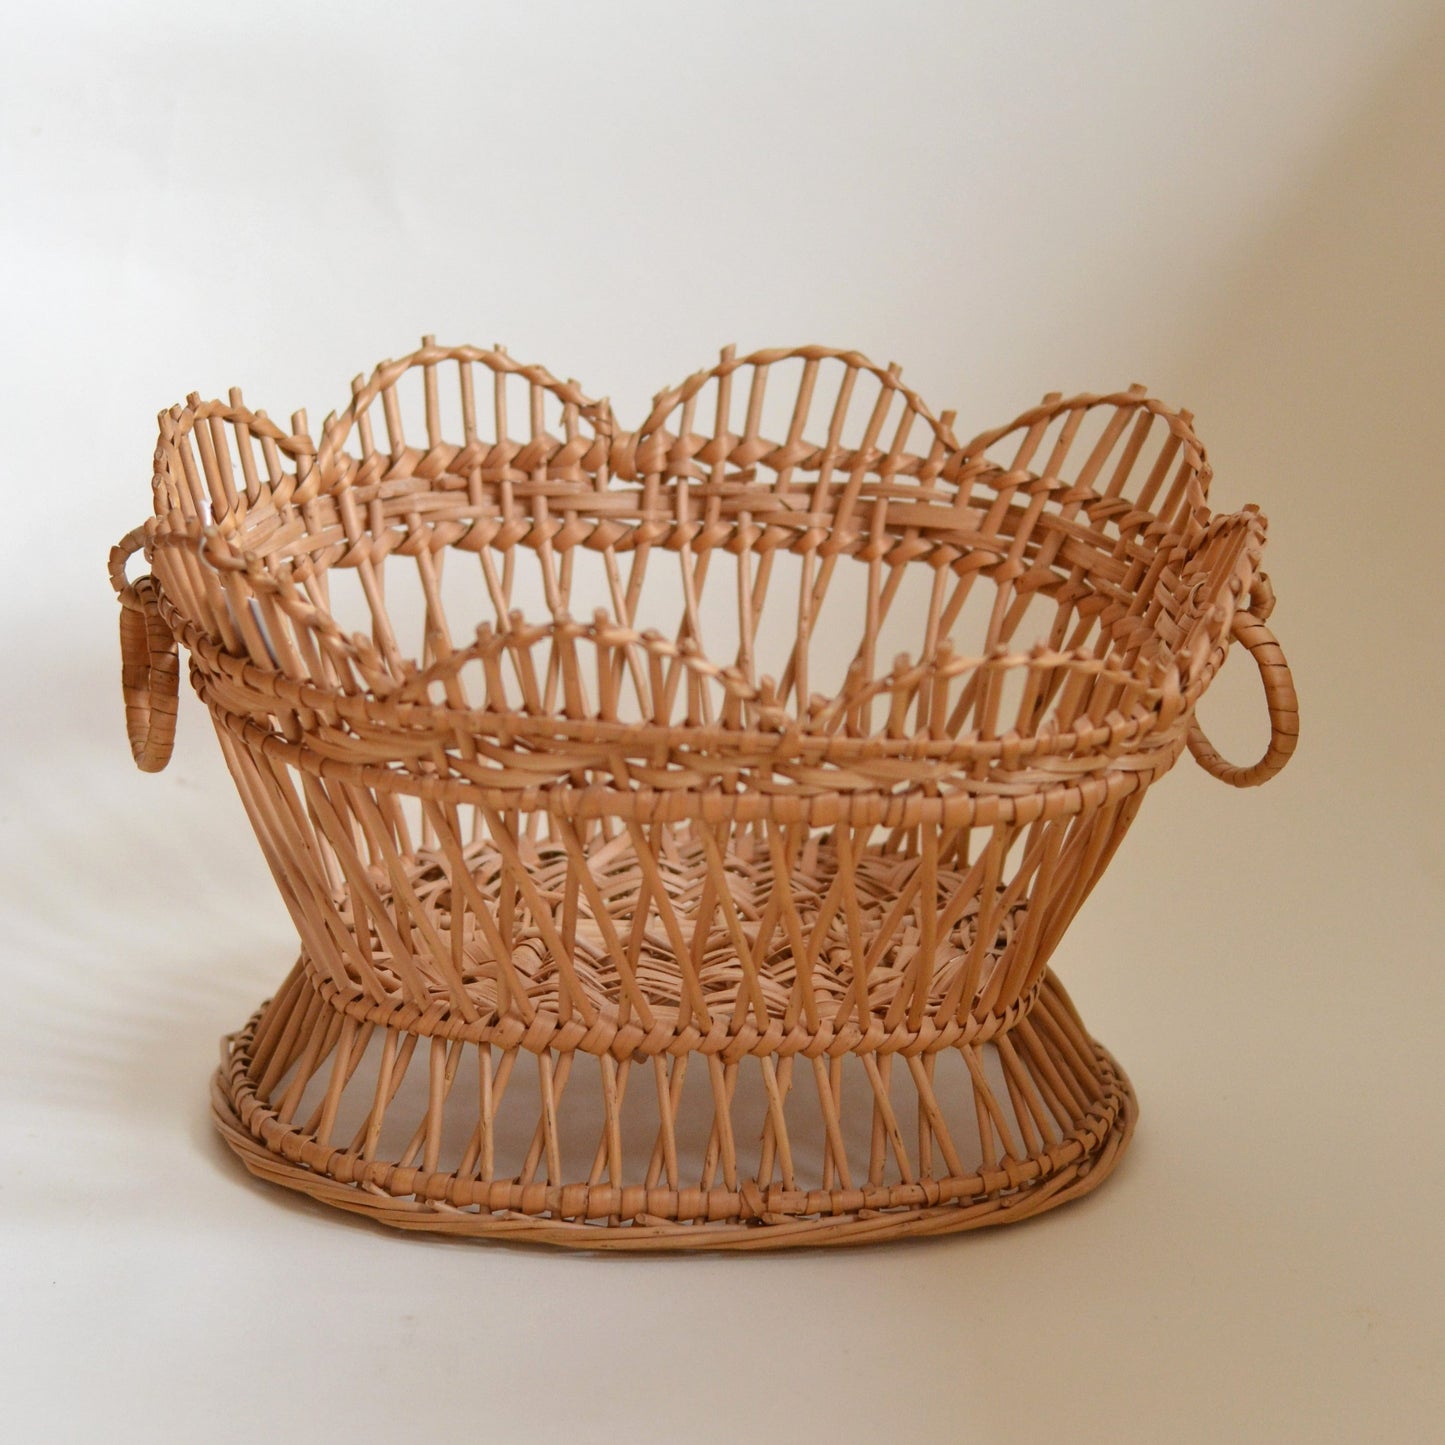 Footed Basket with Ringed Handles